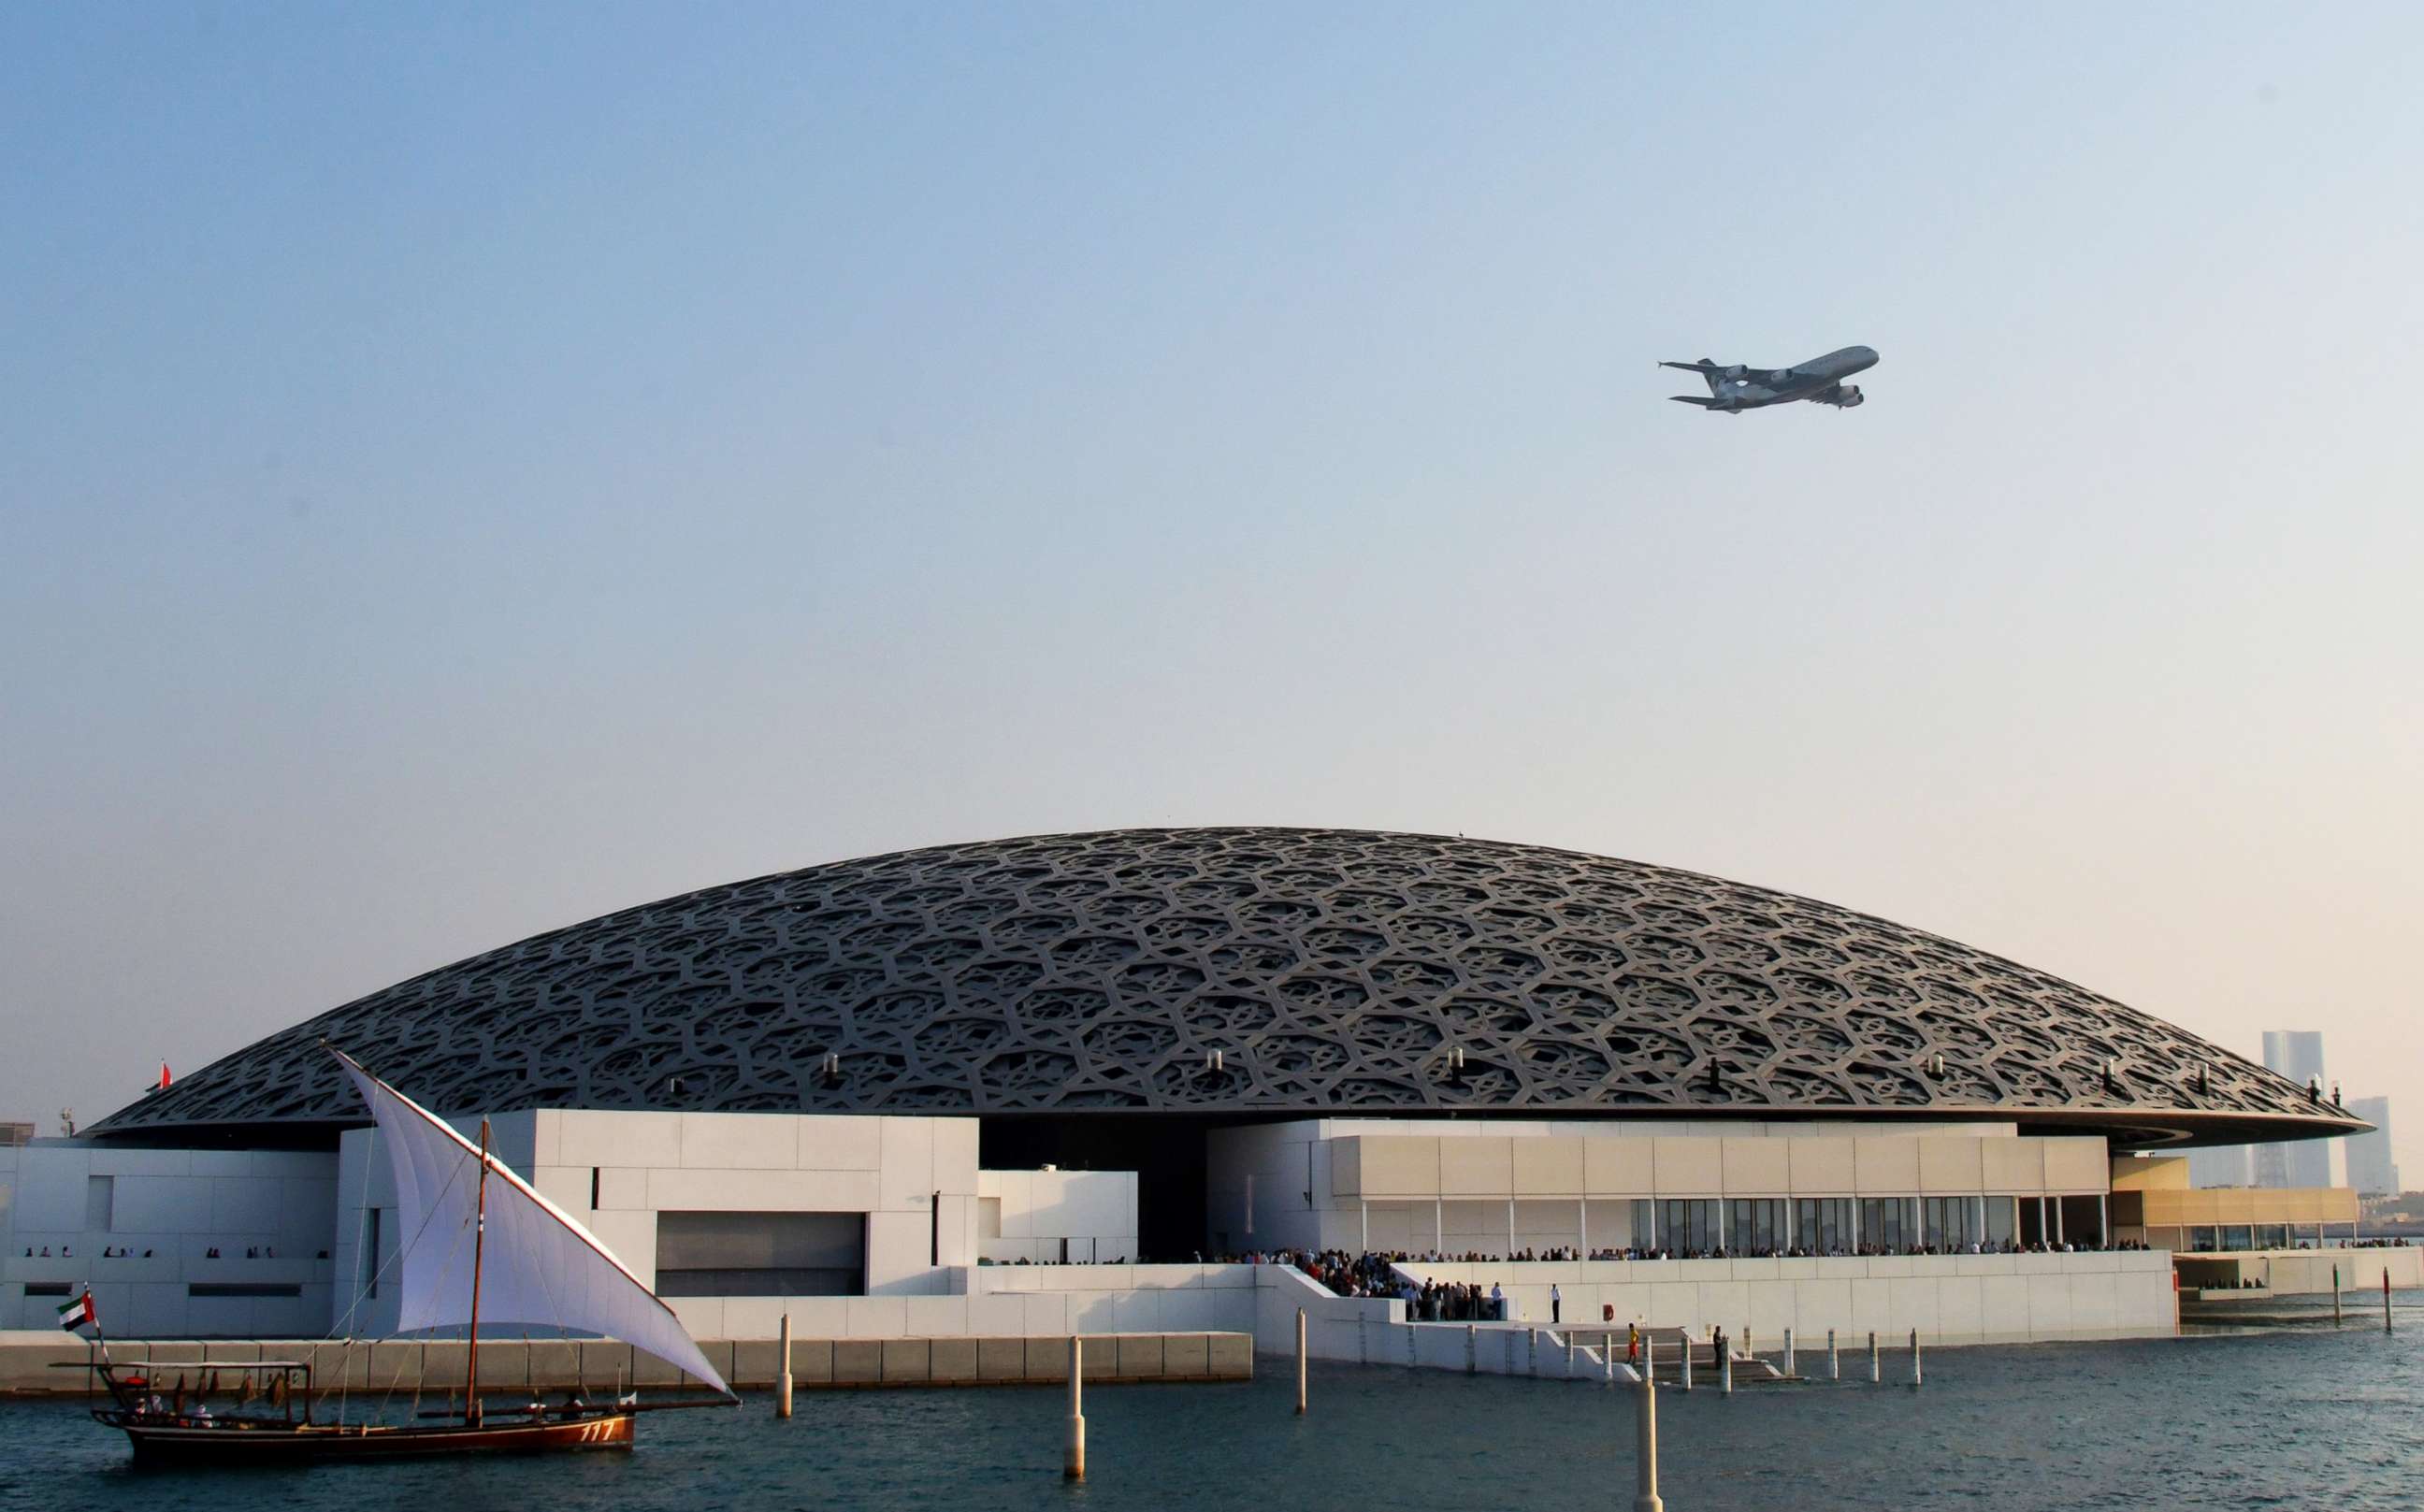 PHOTO: An Ethiad A380 flies over the Louvre Abu Dhabi Museum designed by French architect Jean Nouvel on Nov. 11, 2017, during its official opening to public on Saadiyat island in the Emirati capital. 
